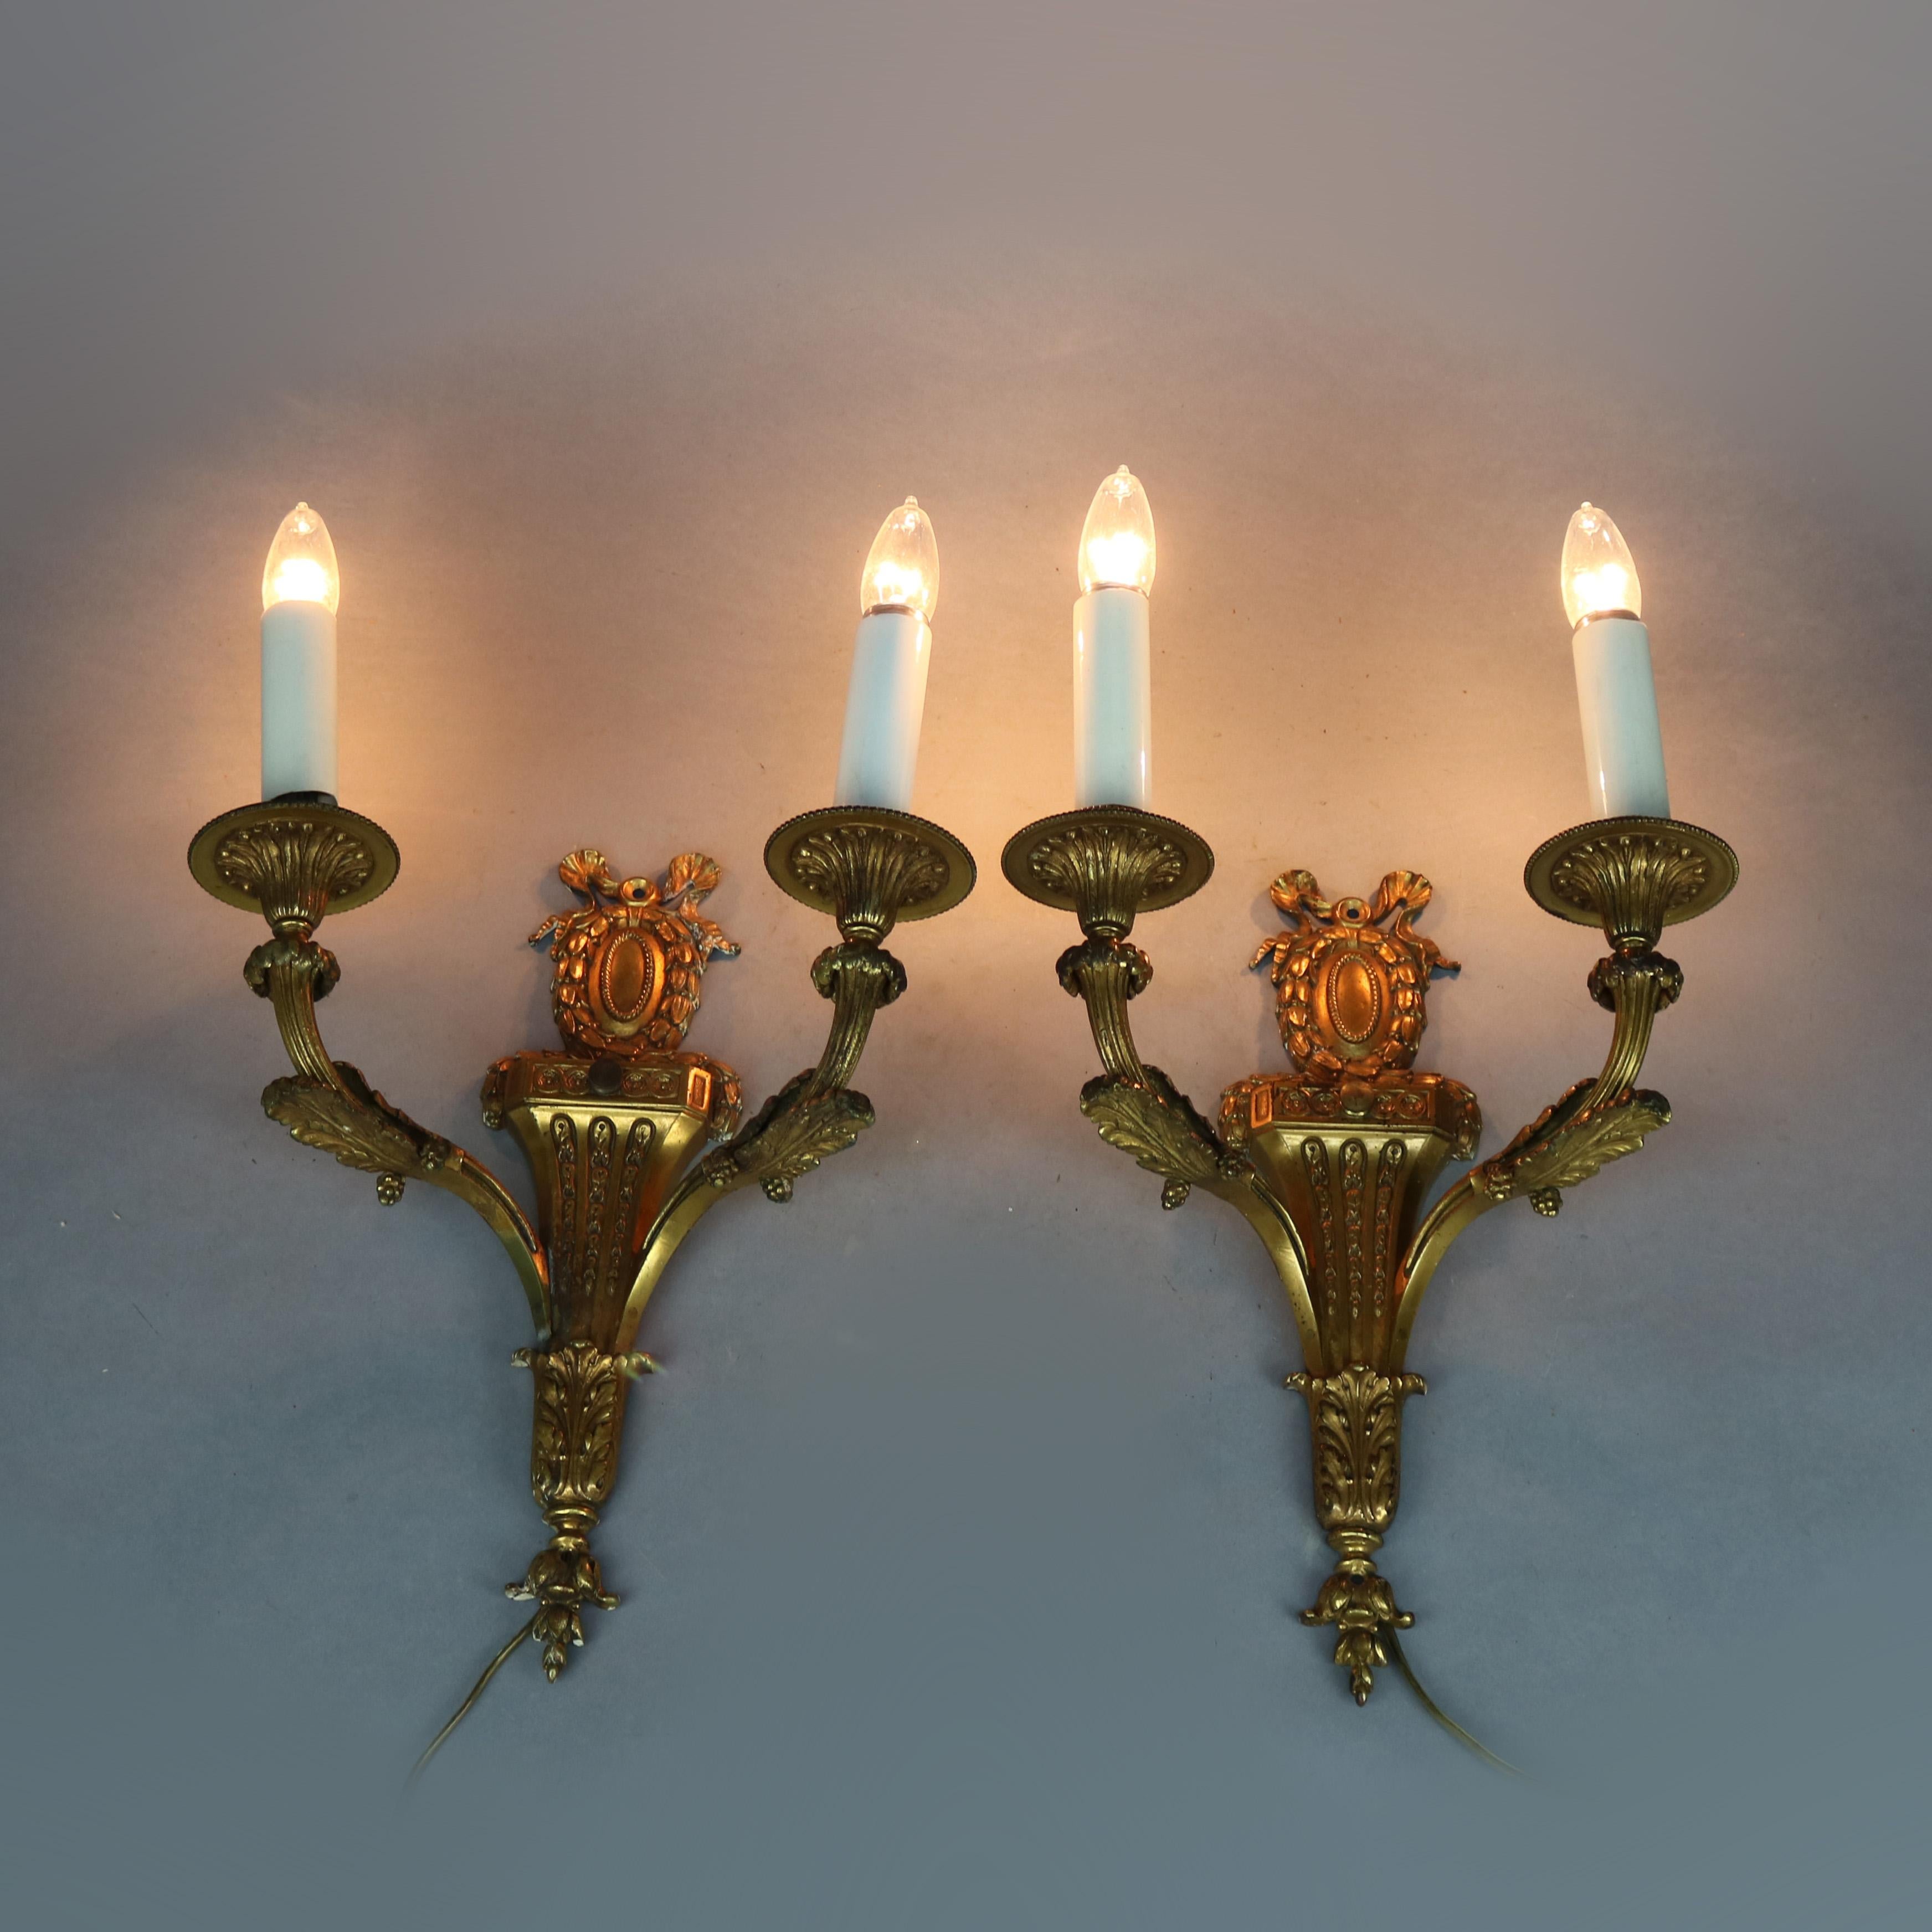 Antique Pair of French Empire Gilt Bronze Torchiere Wall Sconces, 20th Century 6